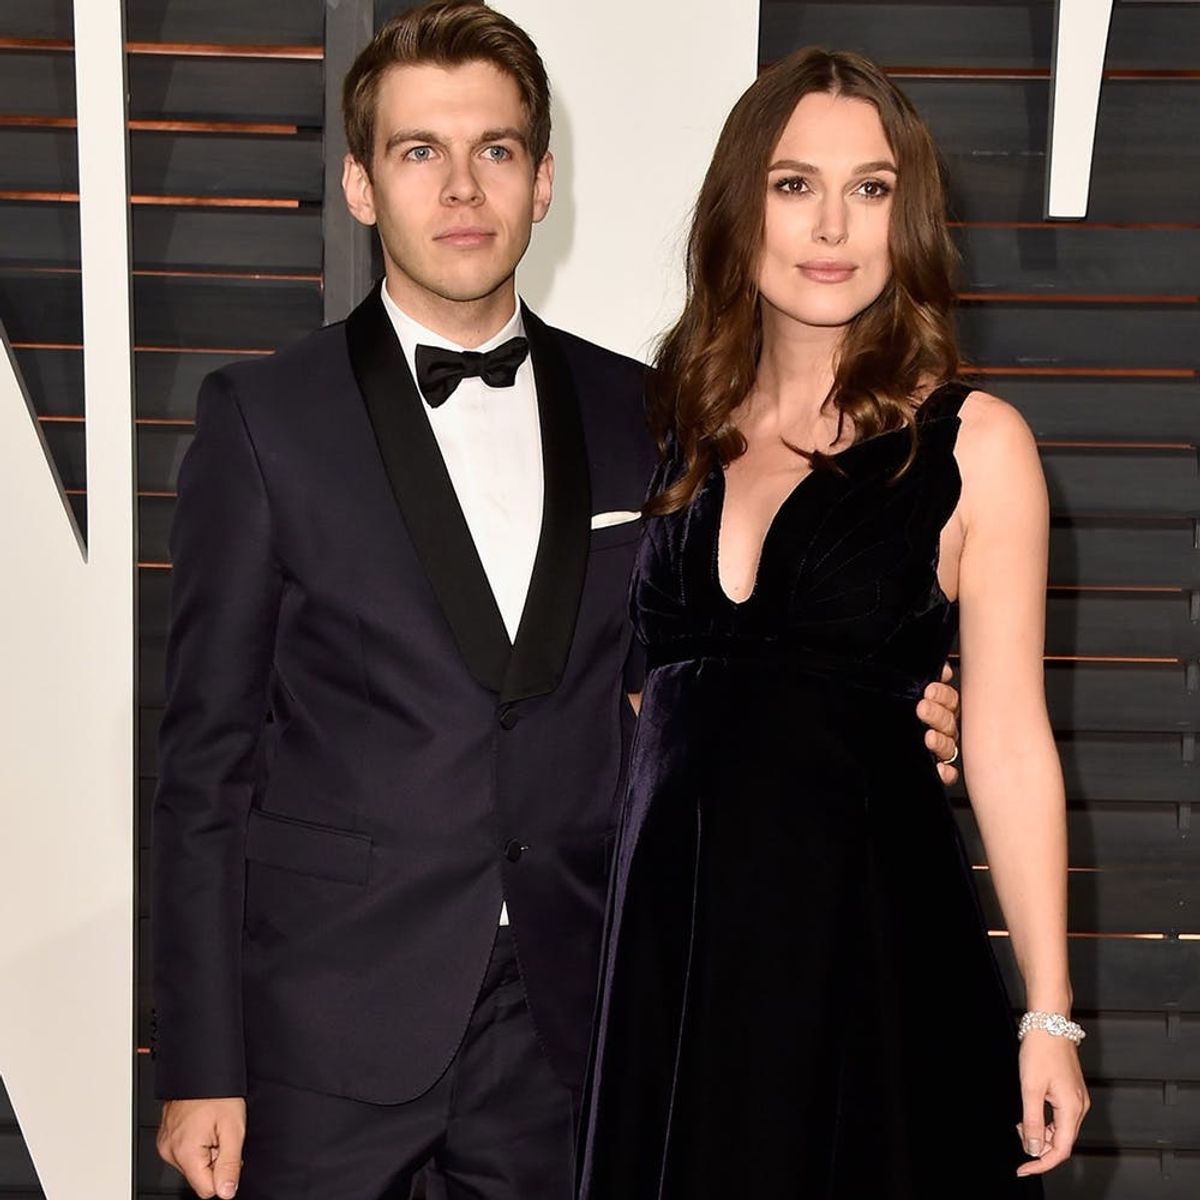 Keira Knightley Just Revealed Her Glamorous Baby Name